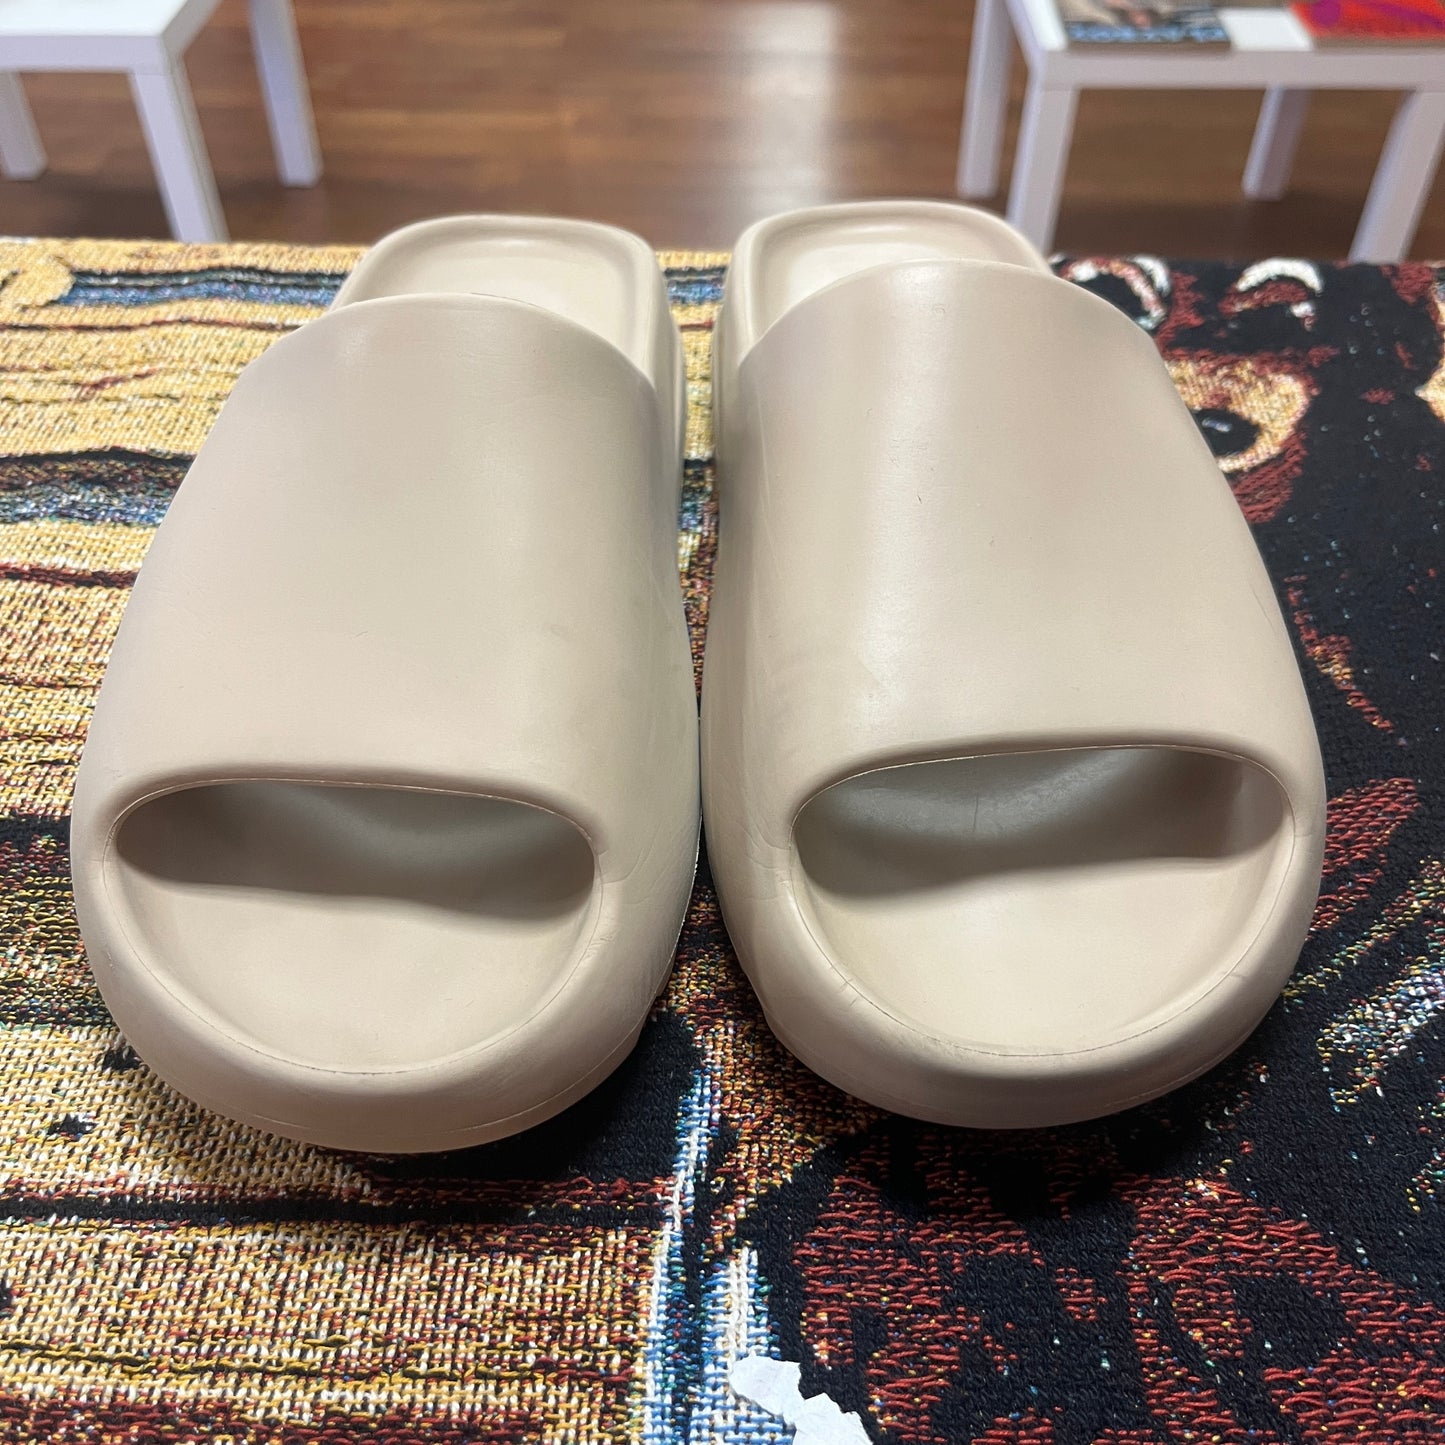 adidas Yeezy Slide Pure (First Release) - Preloved